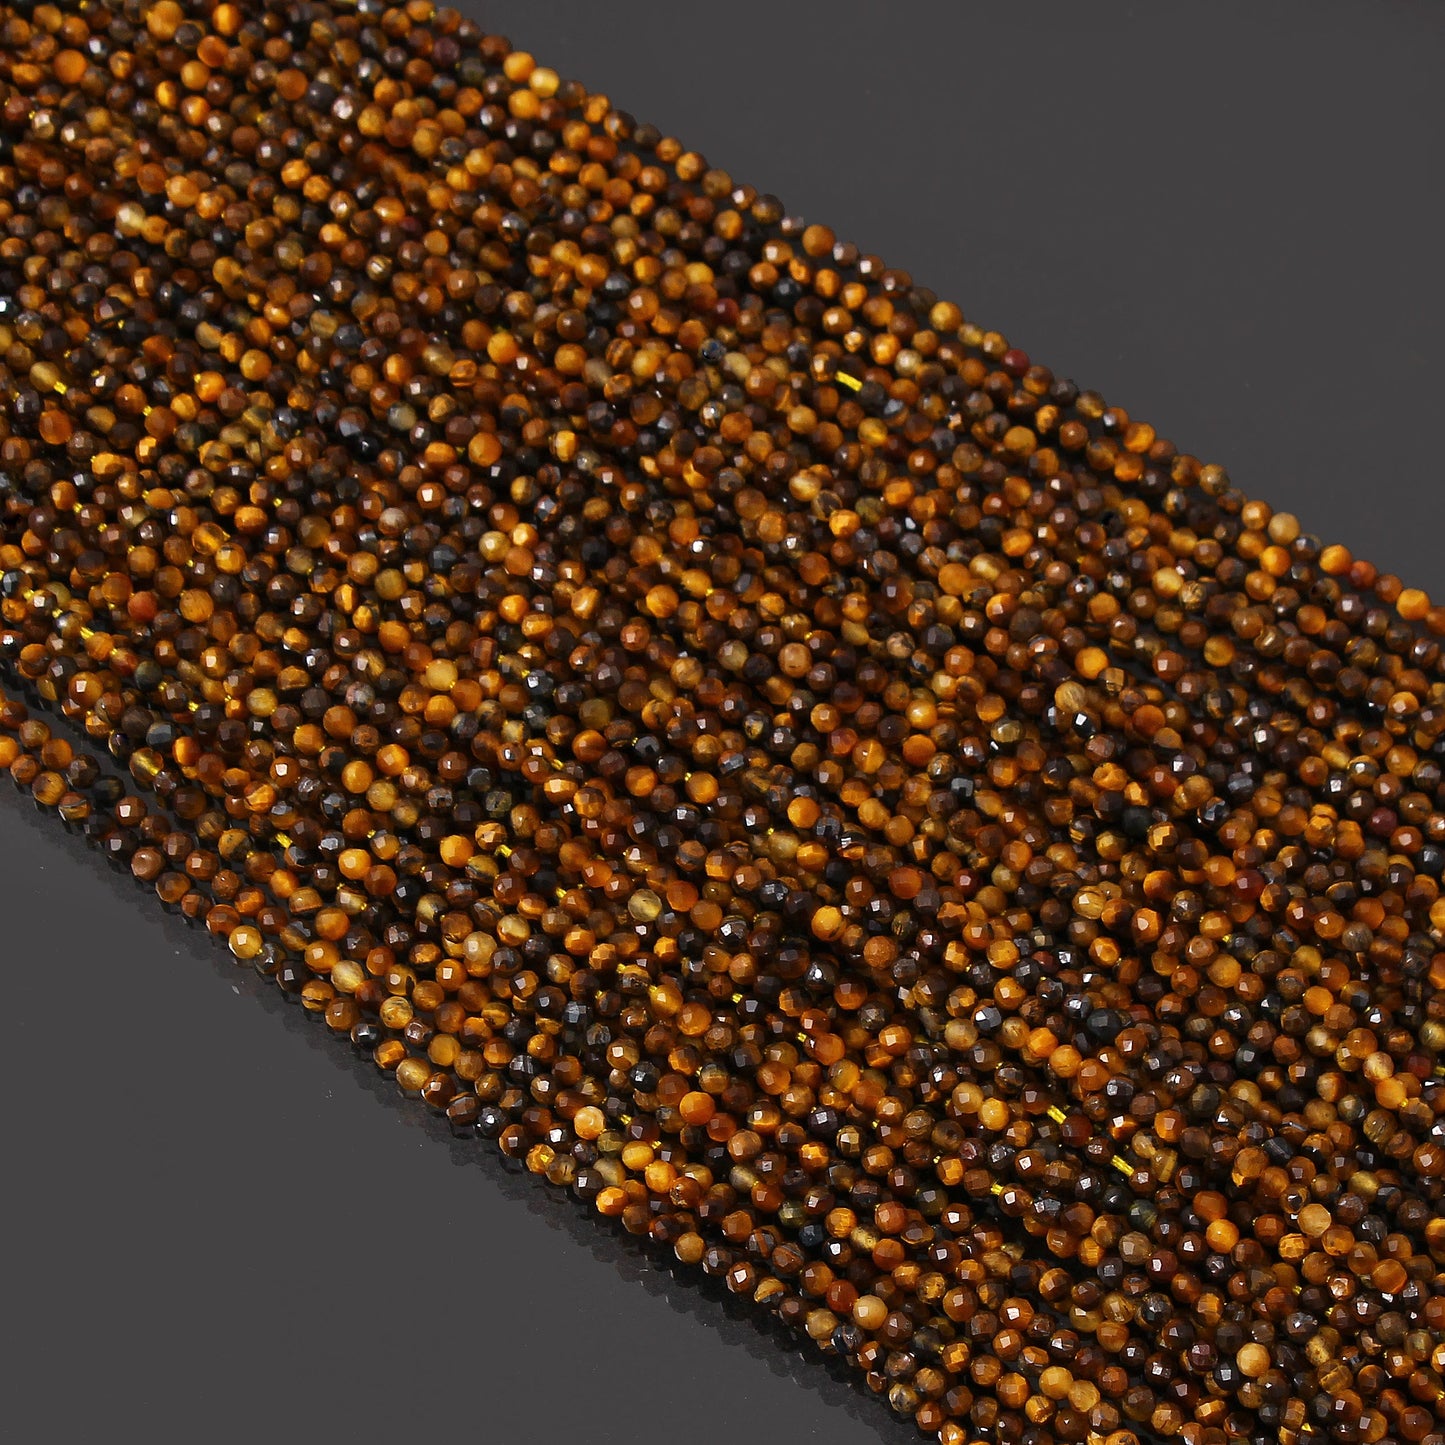 Tiger Eye Micro Faceted Cut Tiny Gemstone 2.5-3 mm Beads - 12.5 inch Strand - Jewelry Supplies GemsRush